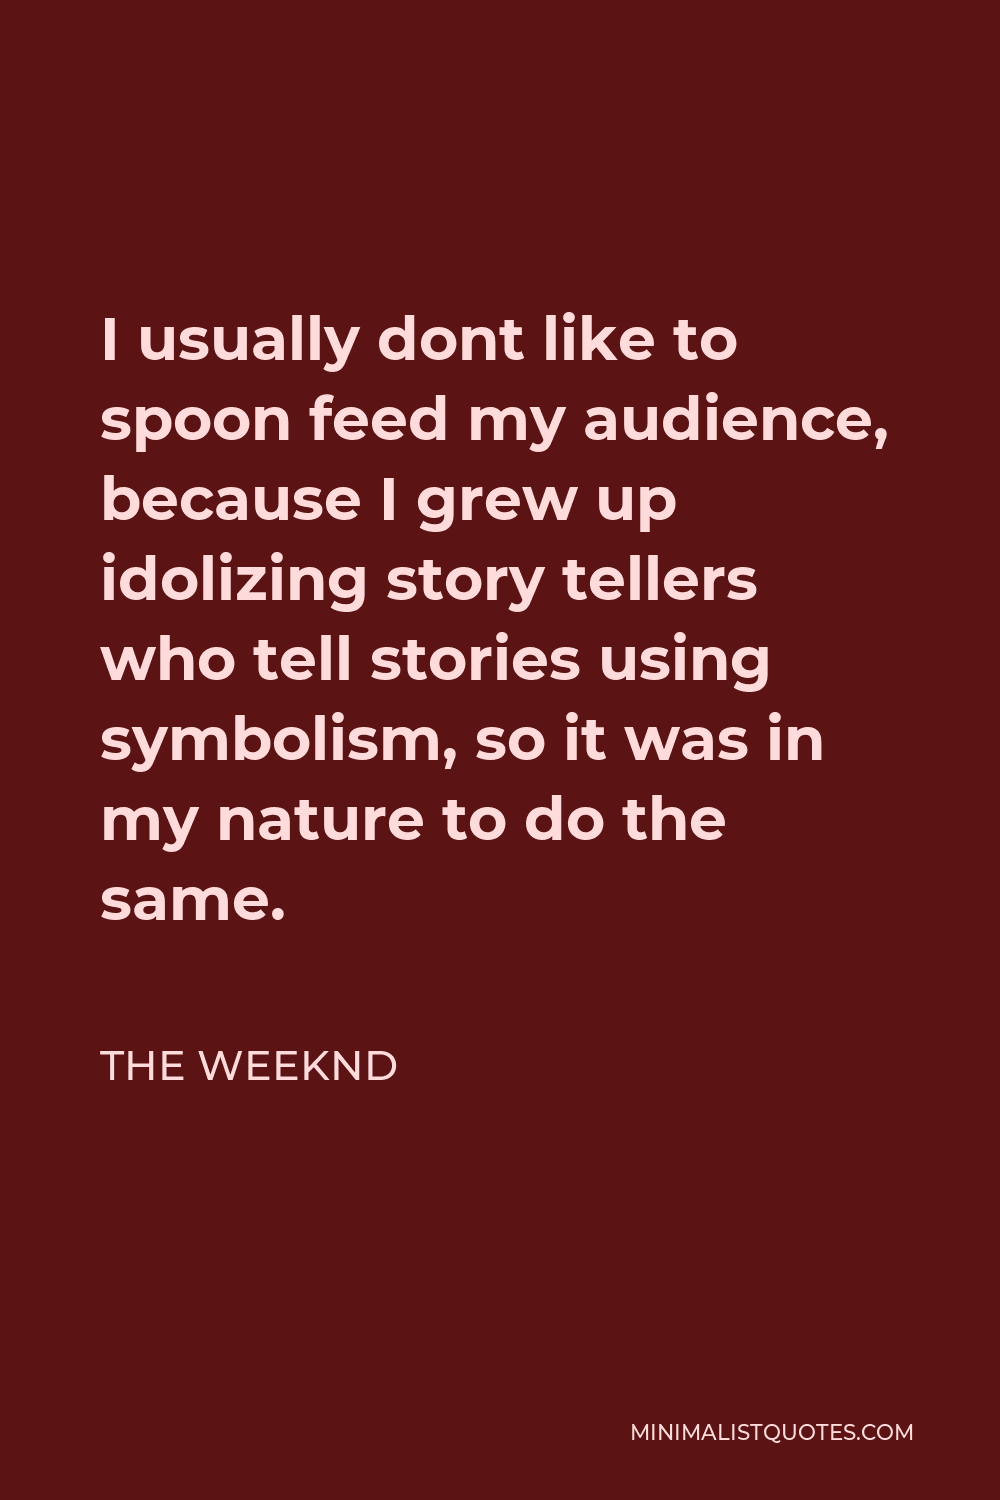 The Weeknd Quote - I usually dont like to spoon feed my audience, because I grew up idolizing story tellers who tell stories using symbolism, so it was in my nature to do the same.